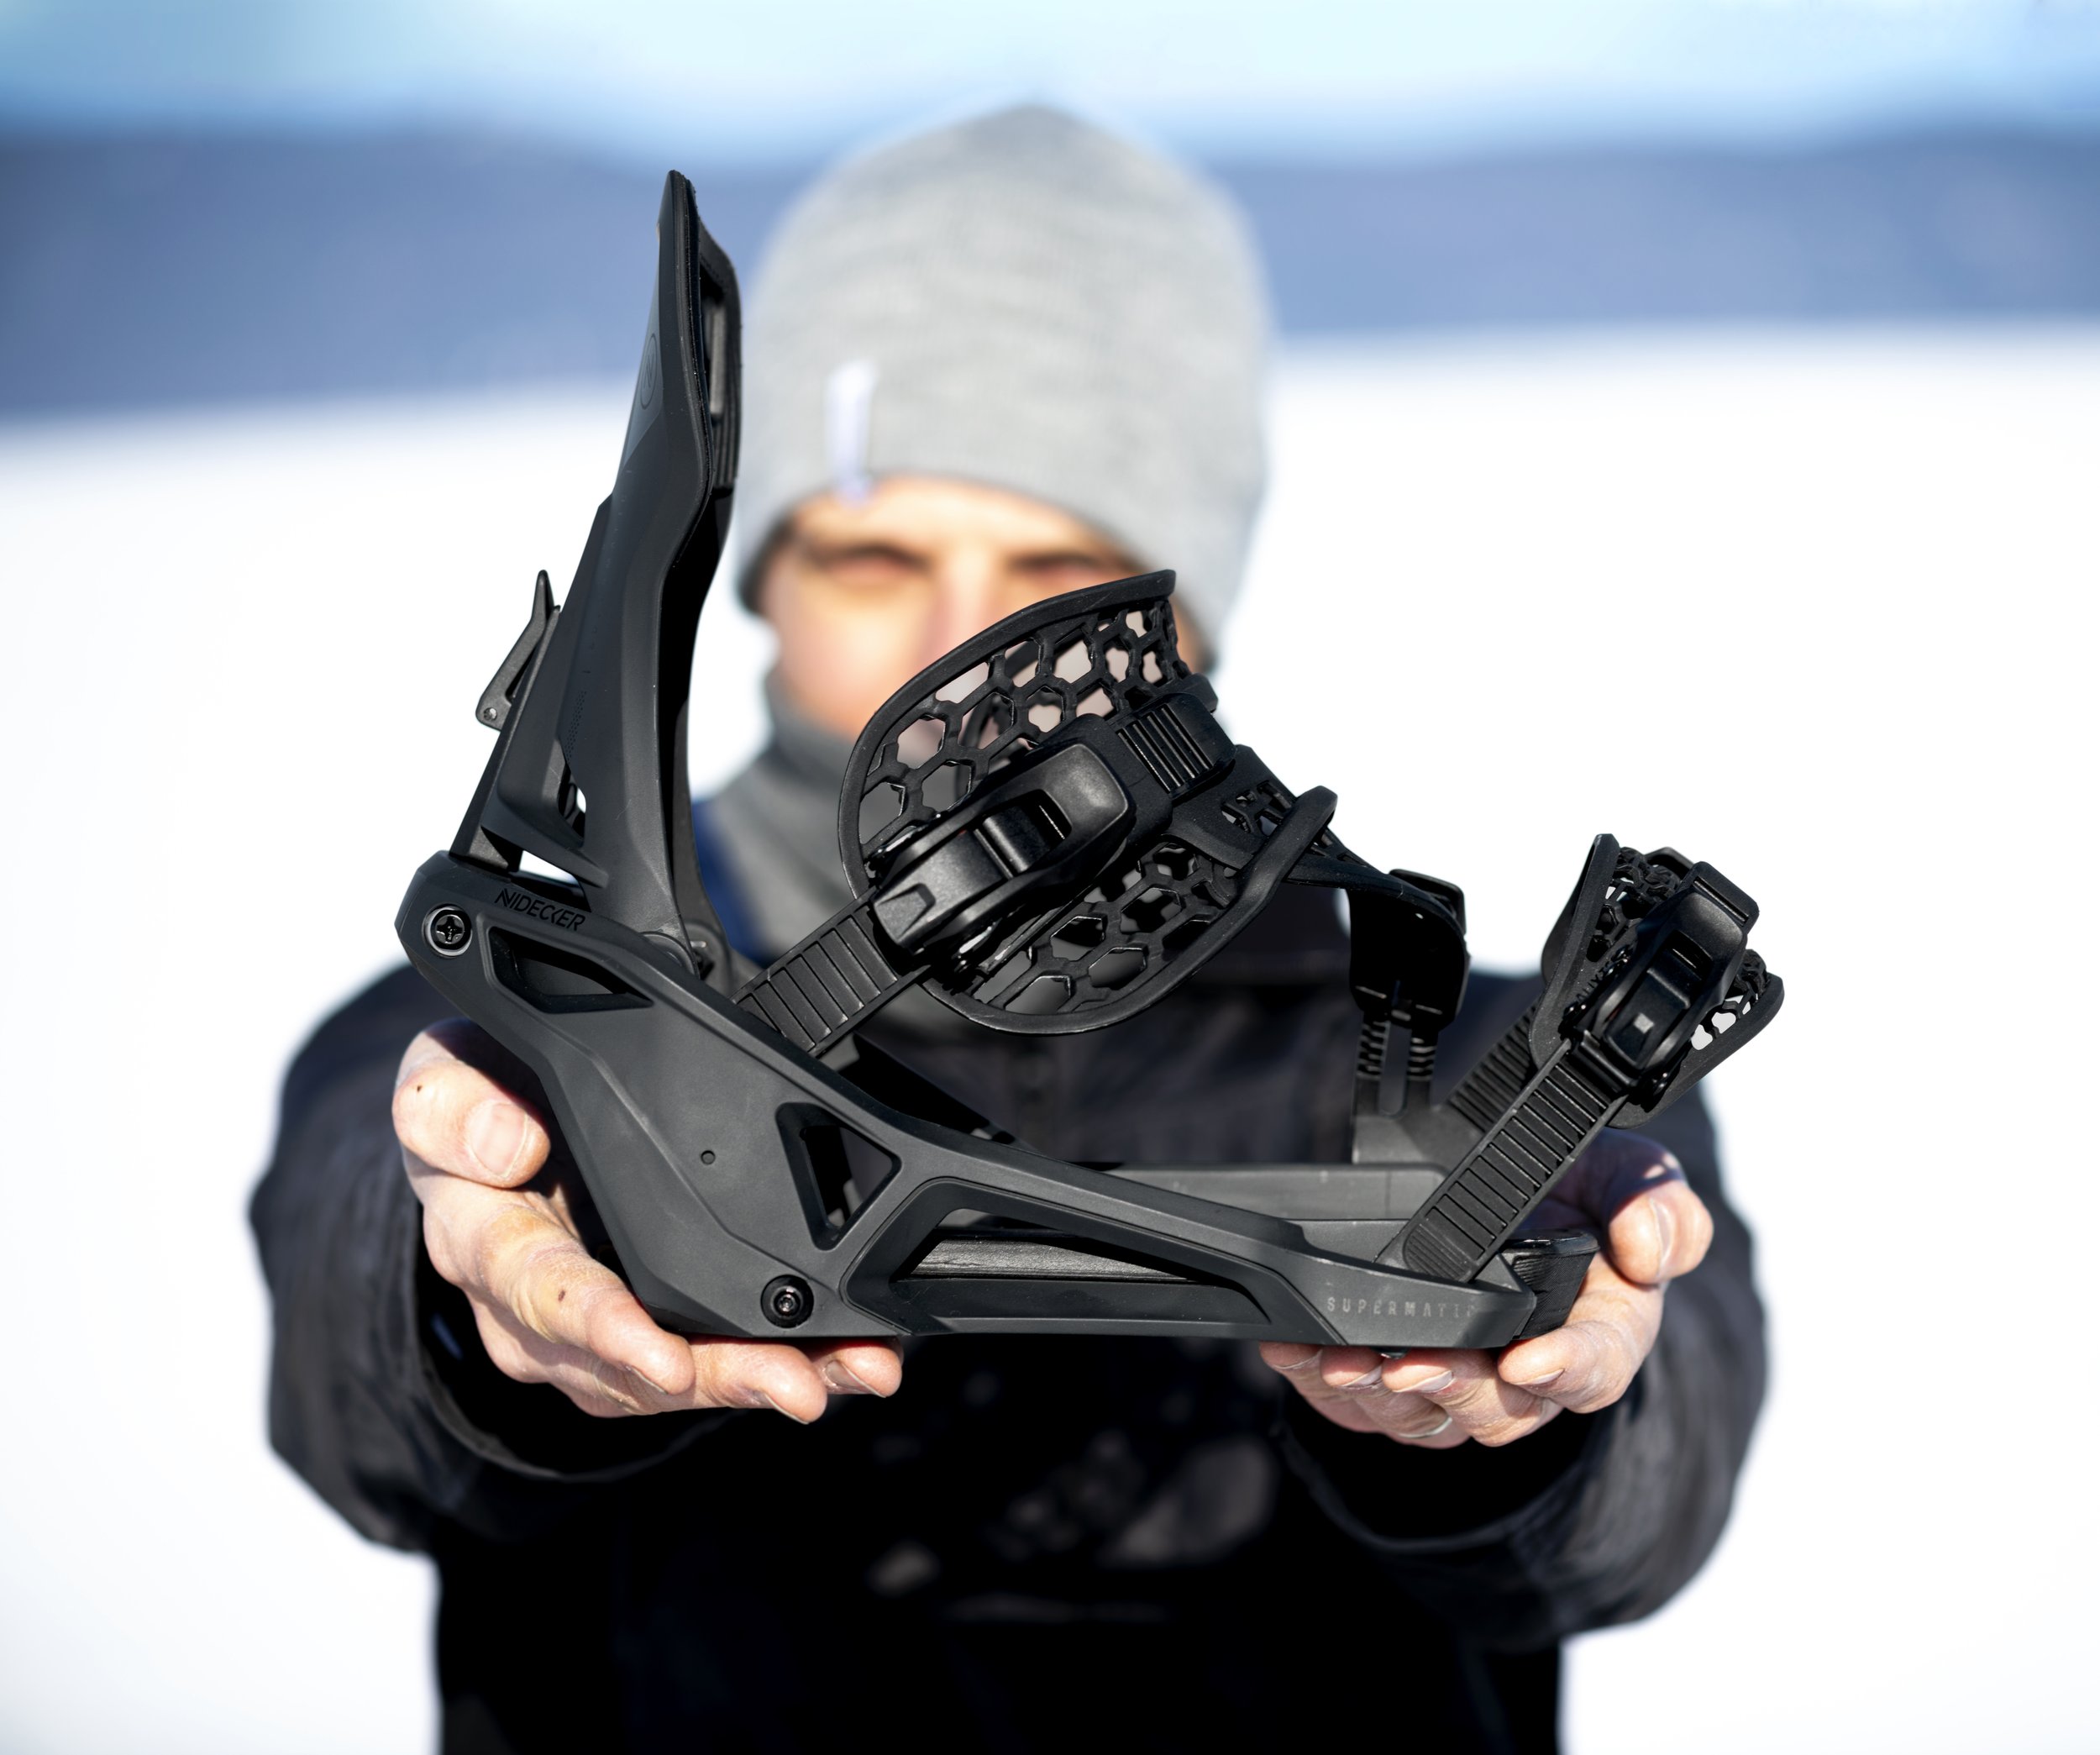 Does Protective Snowboard Gear Actually Work?